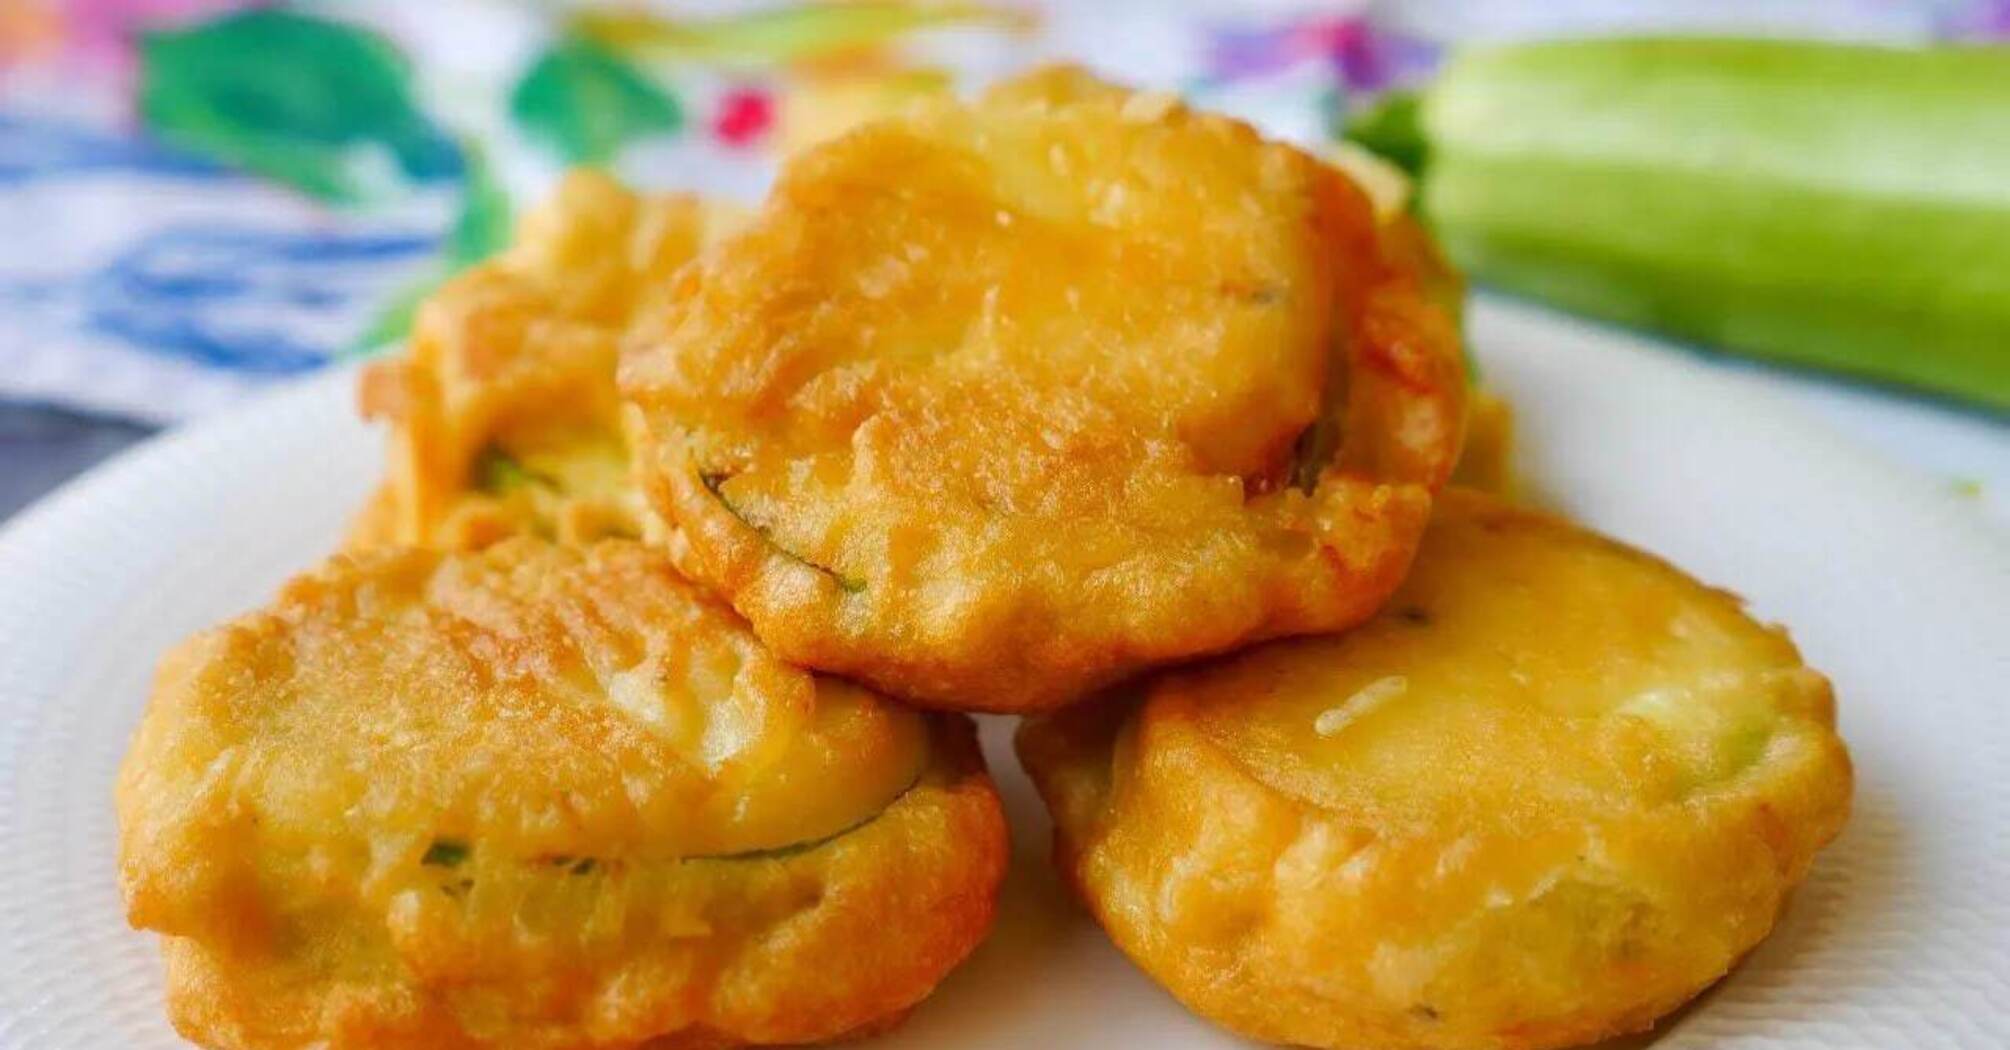 How to fry fresh zucchini in batter